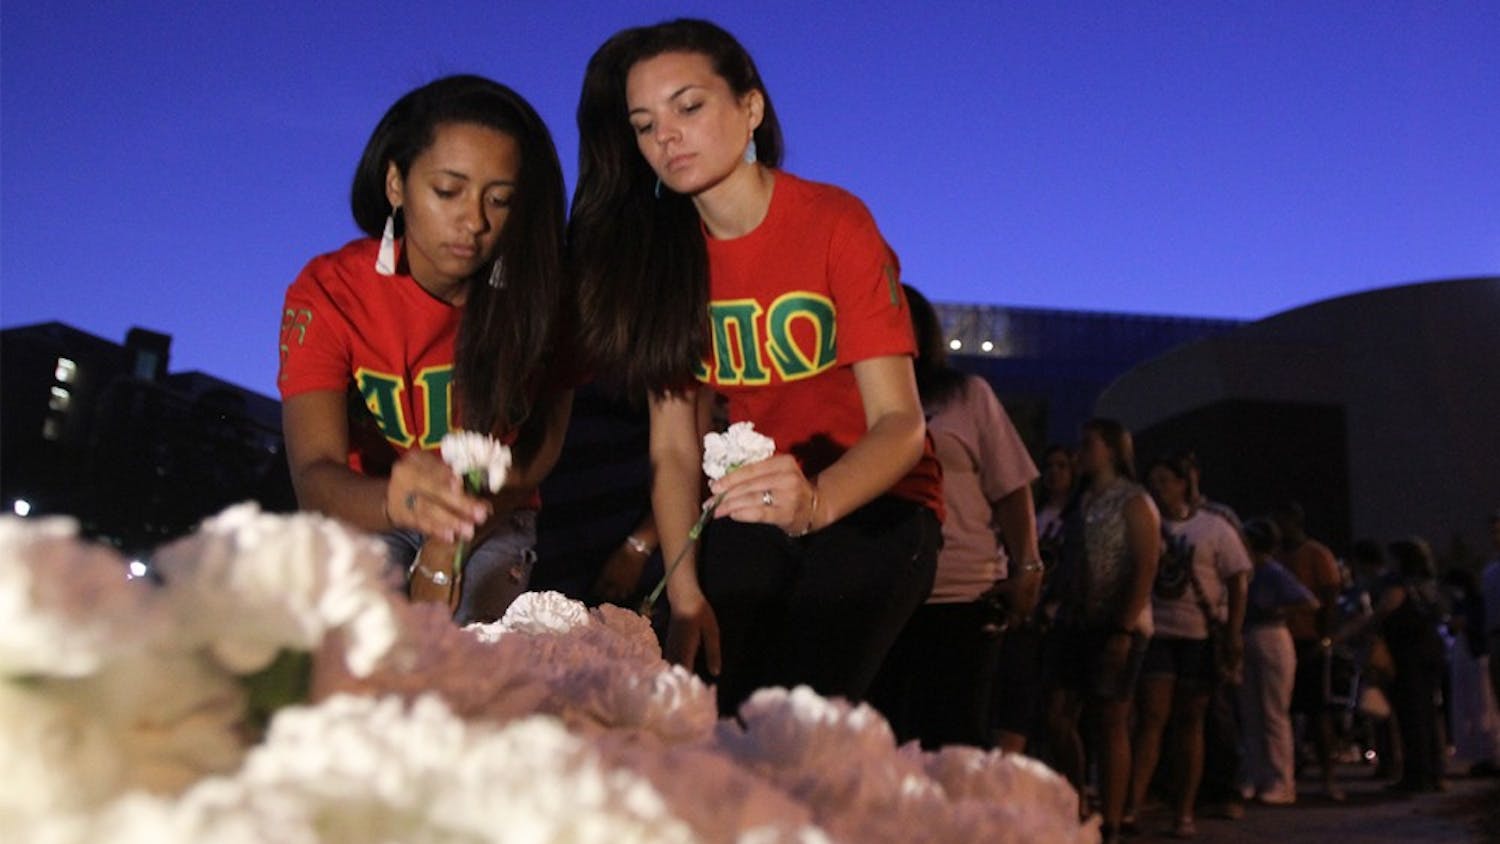 From left, Taylor Springs of the NC State chapter of the Native American Sorority Alpha Pi Omega and Brooke Spaulding of the Campbell chapter pick up carnations for the silent walk held for the anniversary of Faith Hedgepeth's death on Saturday, Sept. 7, 2013.&nbsp;